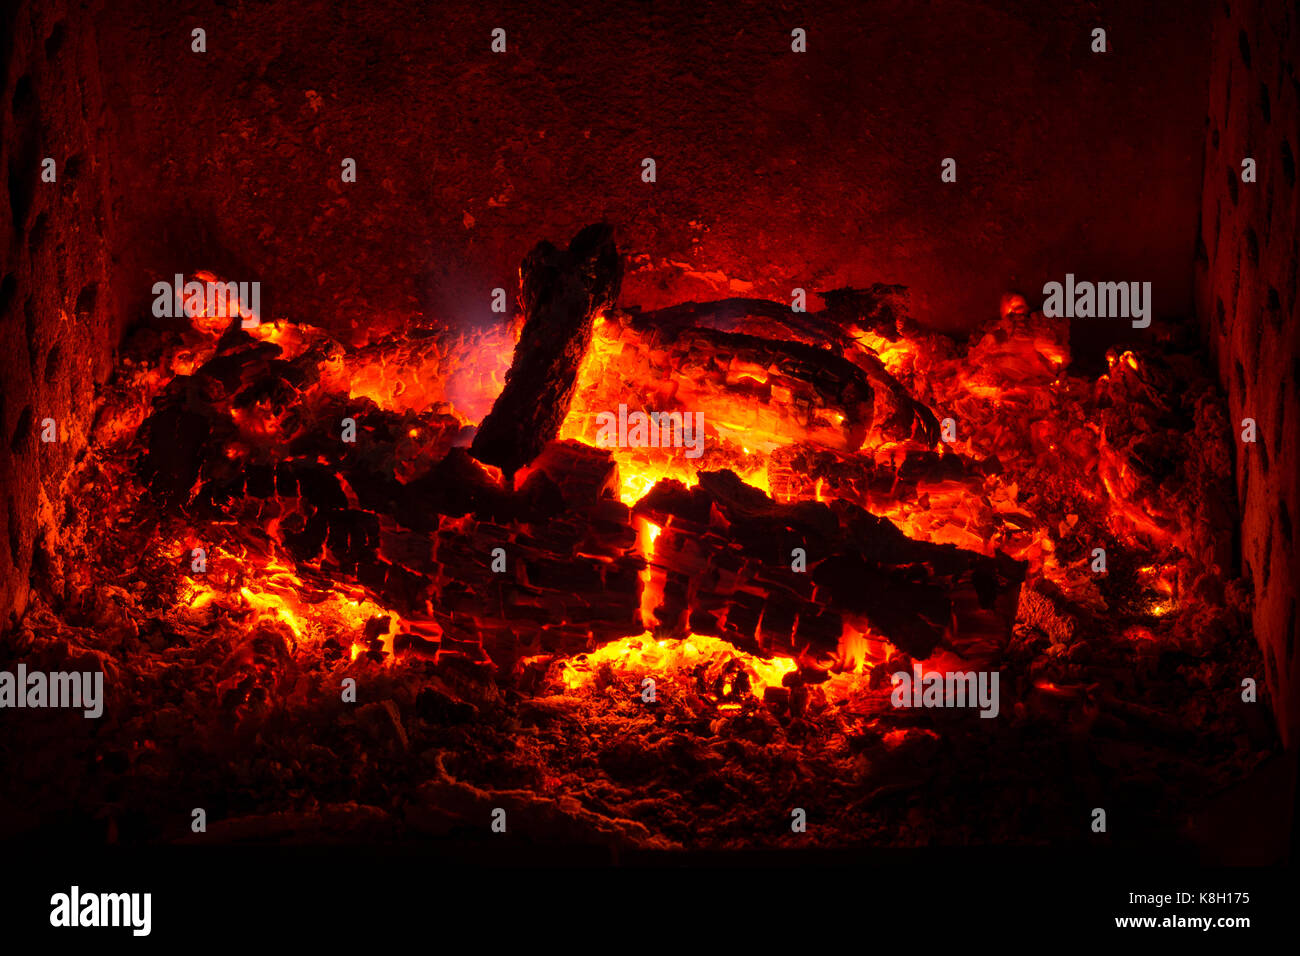 Embers with burned logs and ashes in a fireplace with warm atmosphere Stock Photo